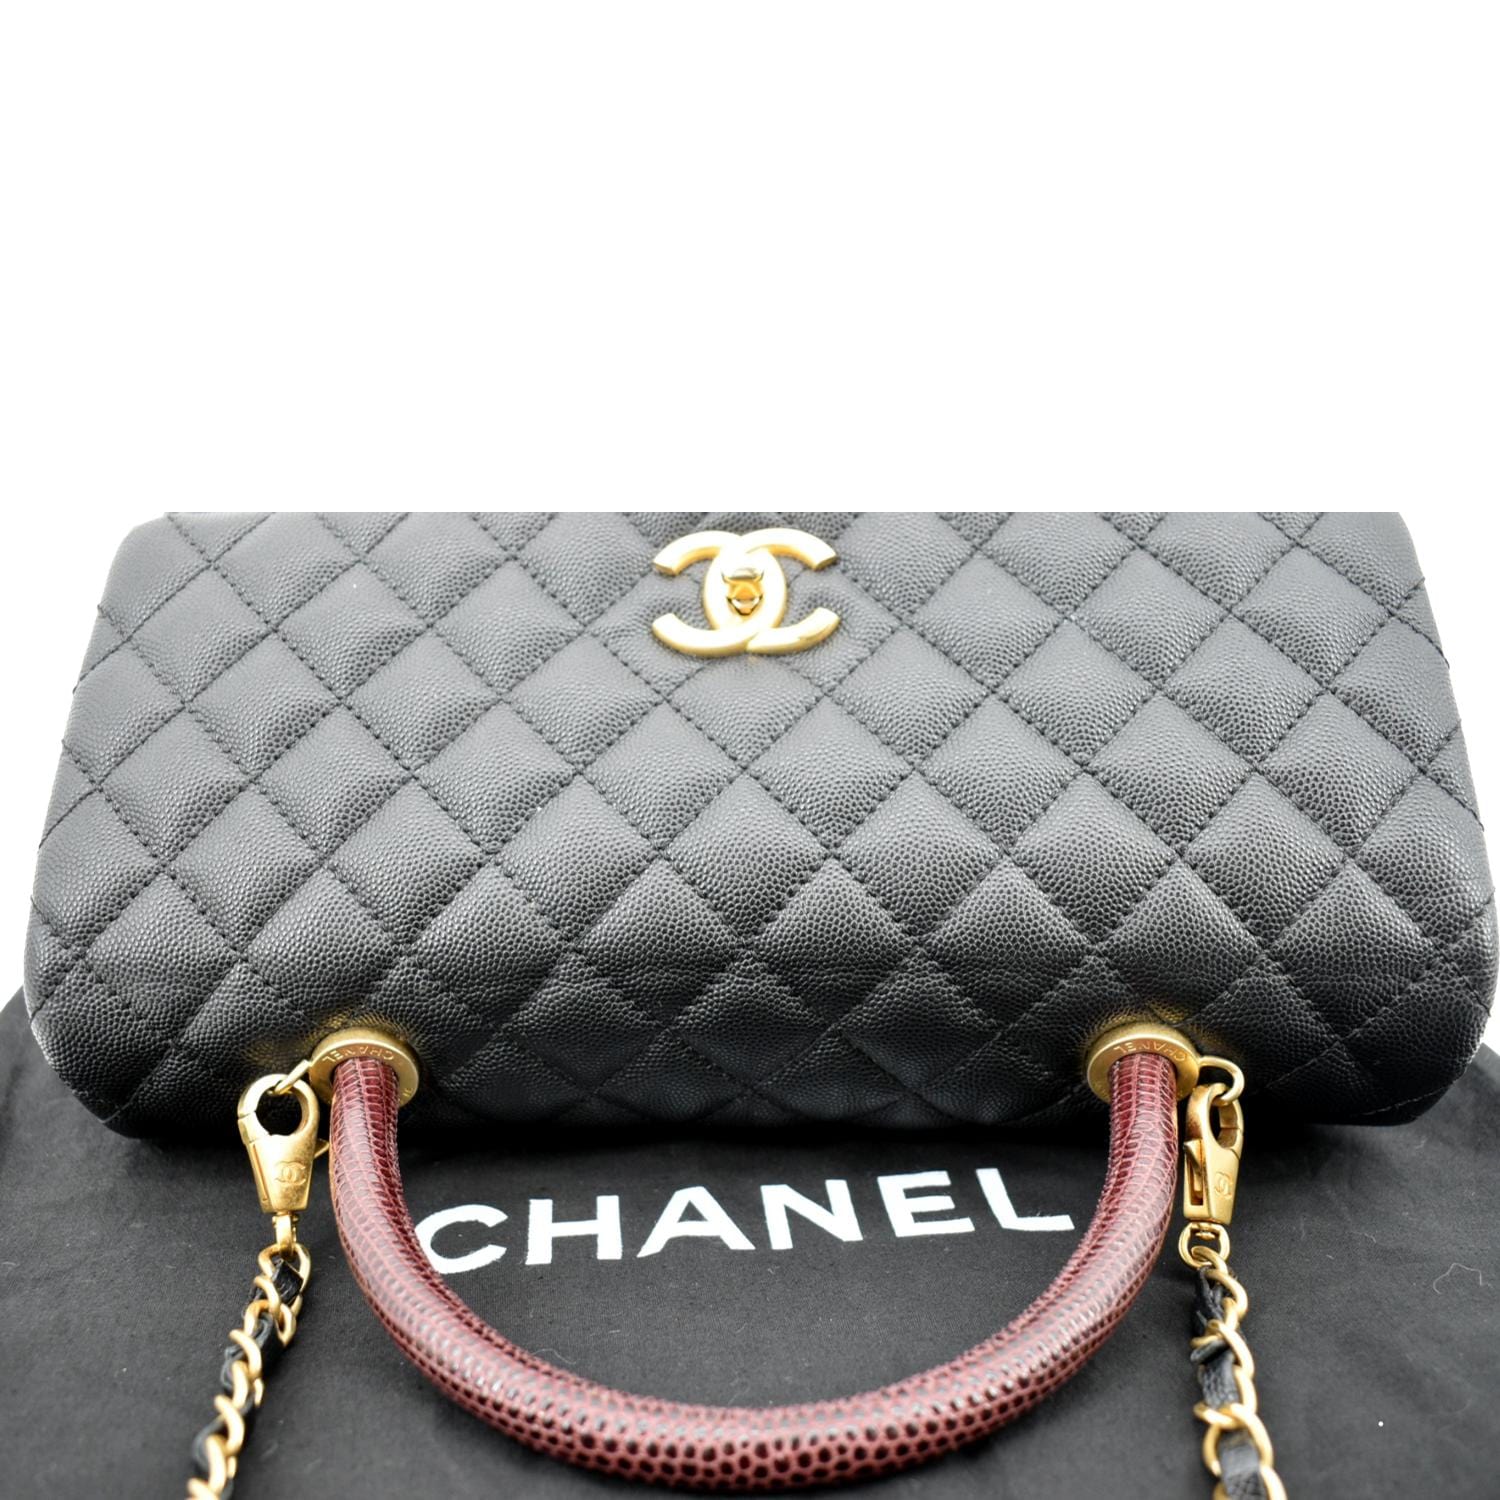 2016 Chanel Burgundy Quilted Caviar Leather Small Coco Handle at 1stDibs